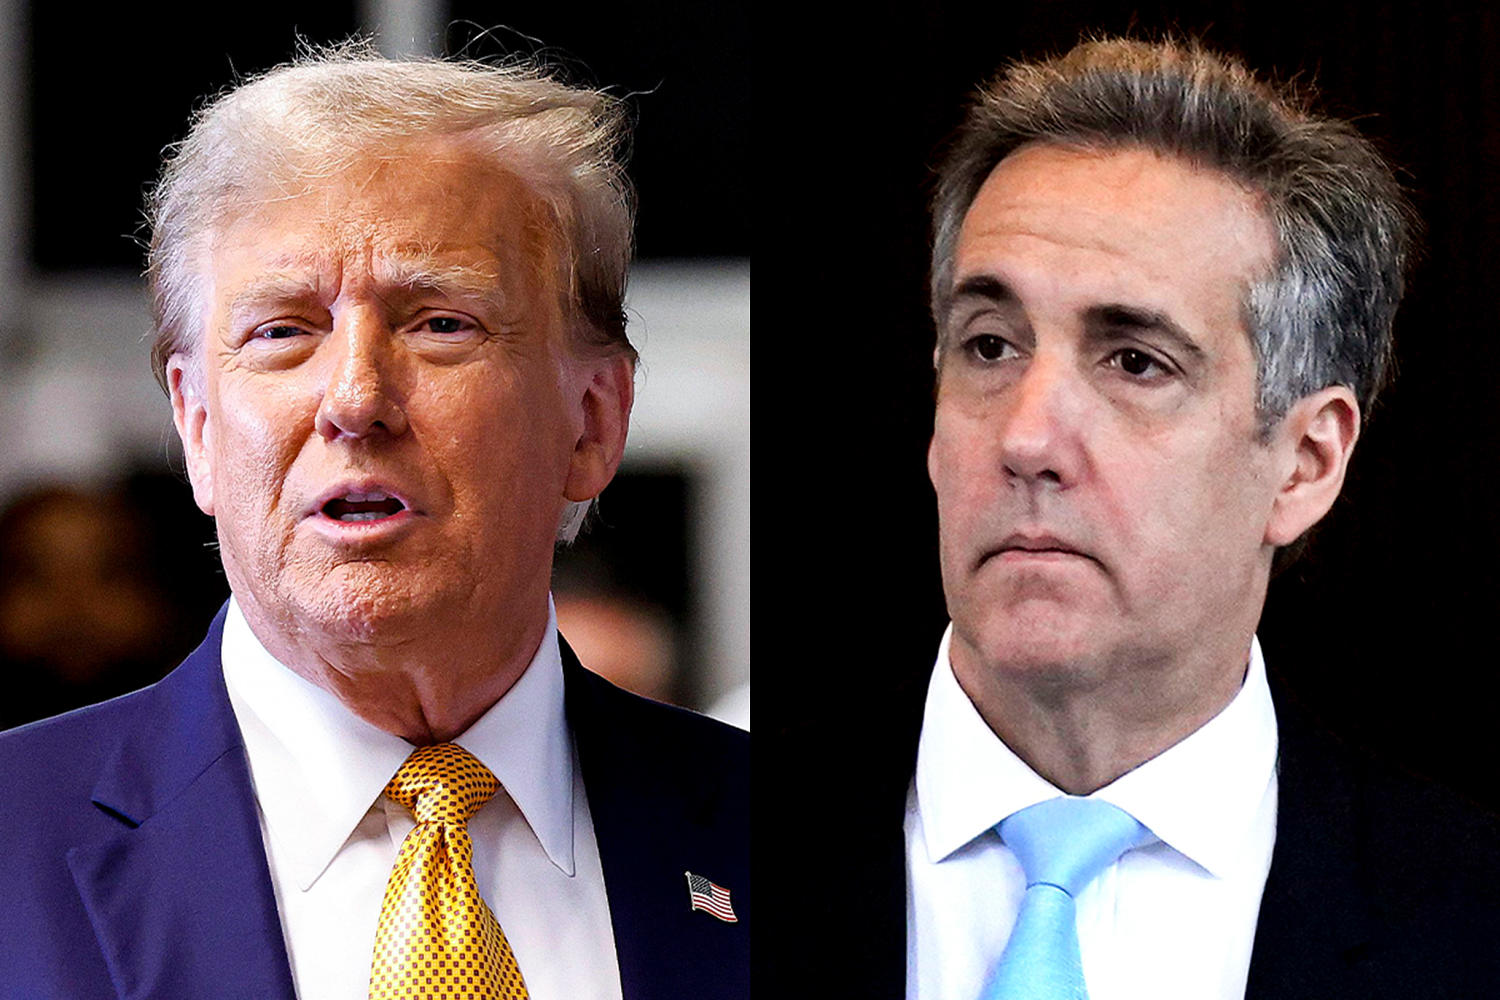 'That was a lie!': Trump's lawyer gets heated during questioning of former fixer Michael Cohen